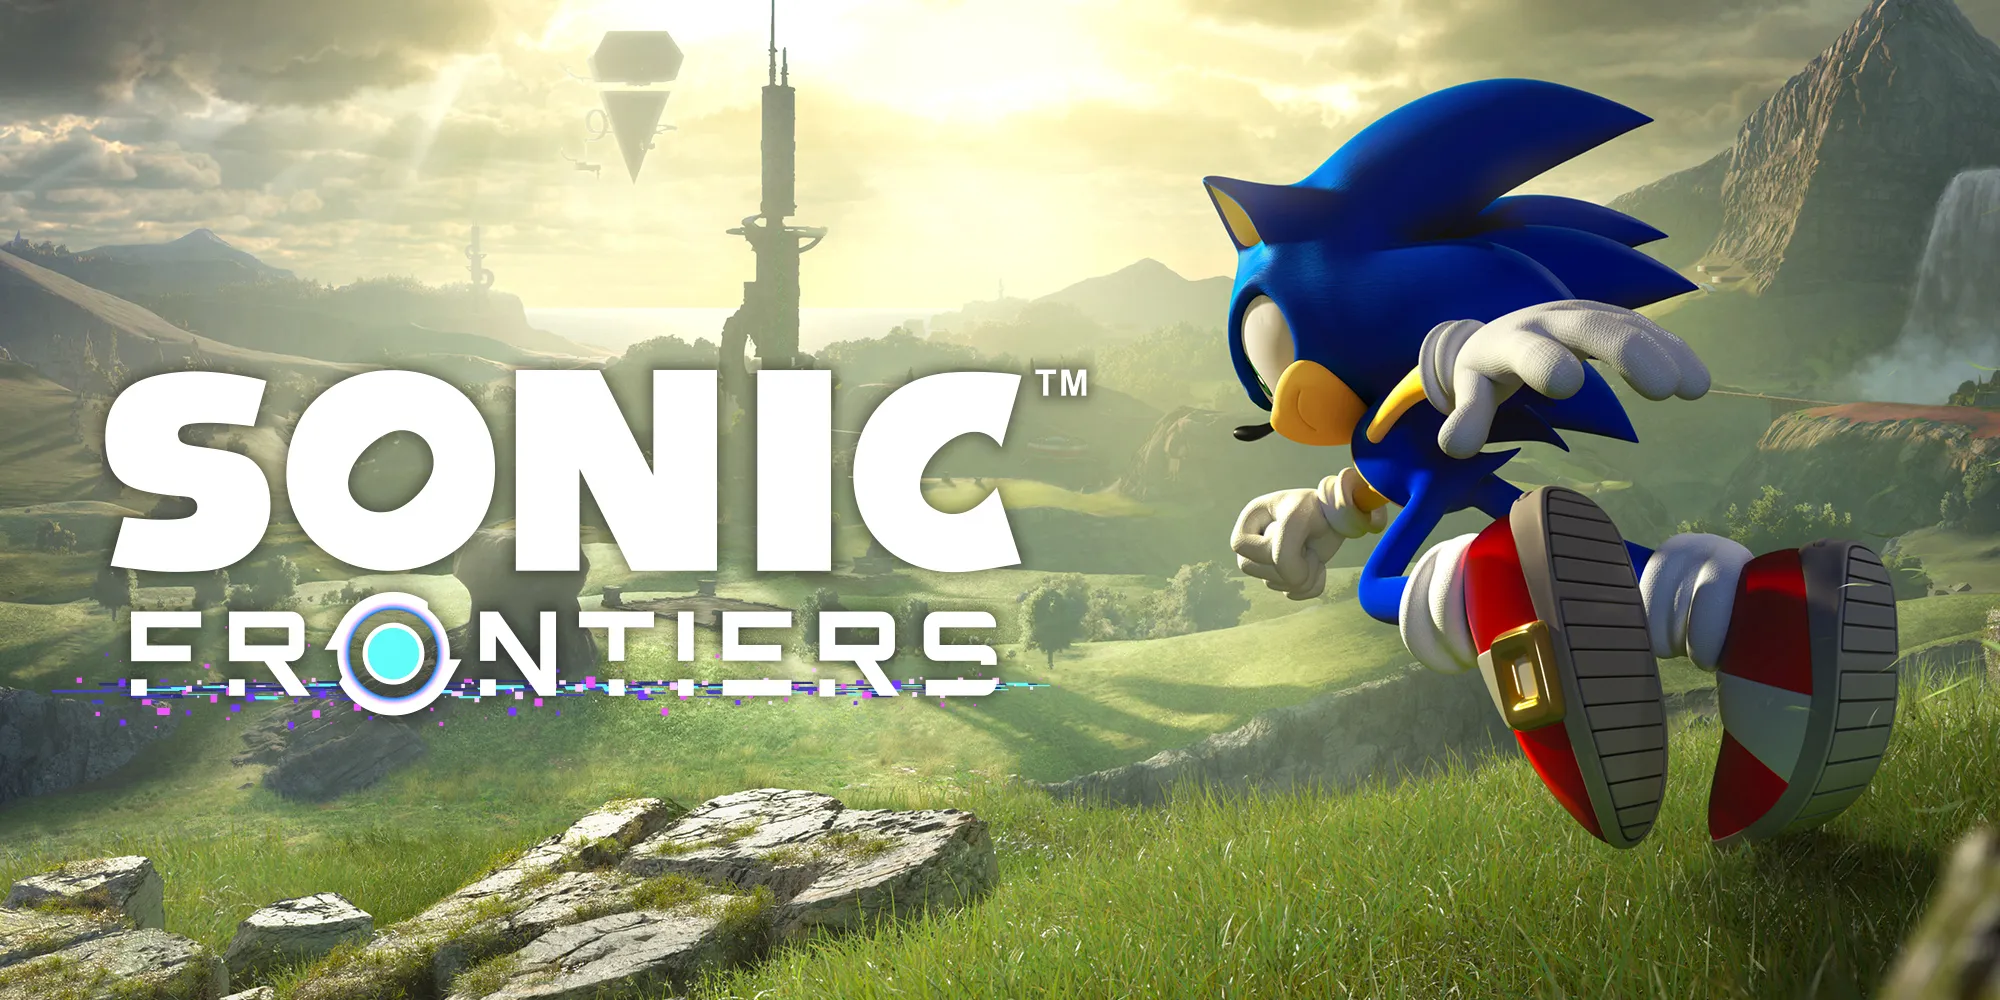 Sonic Frontiers races onto PC and consoles on November 8